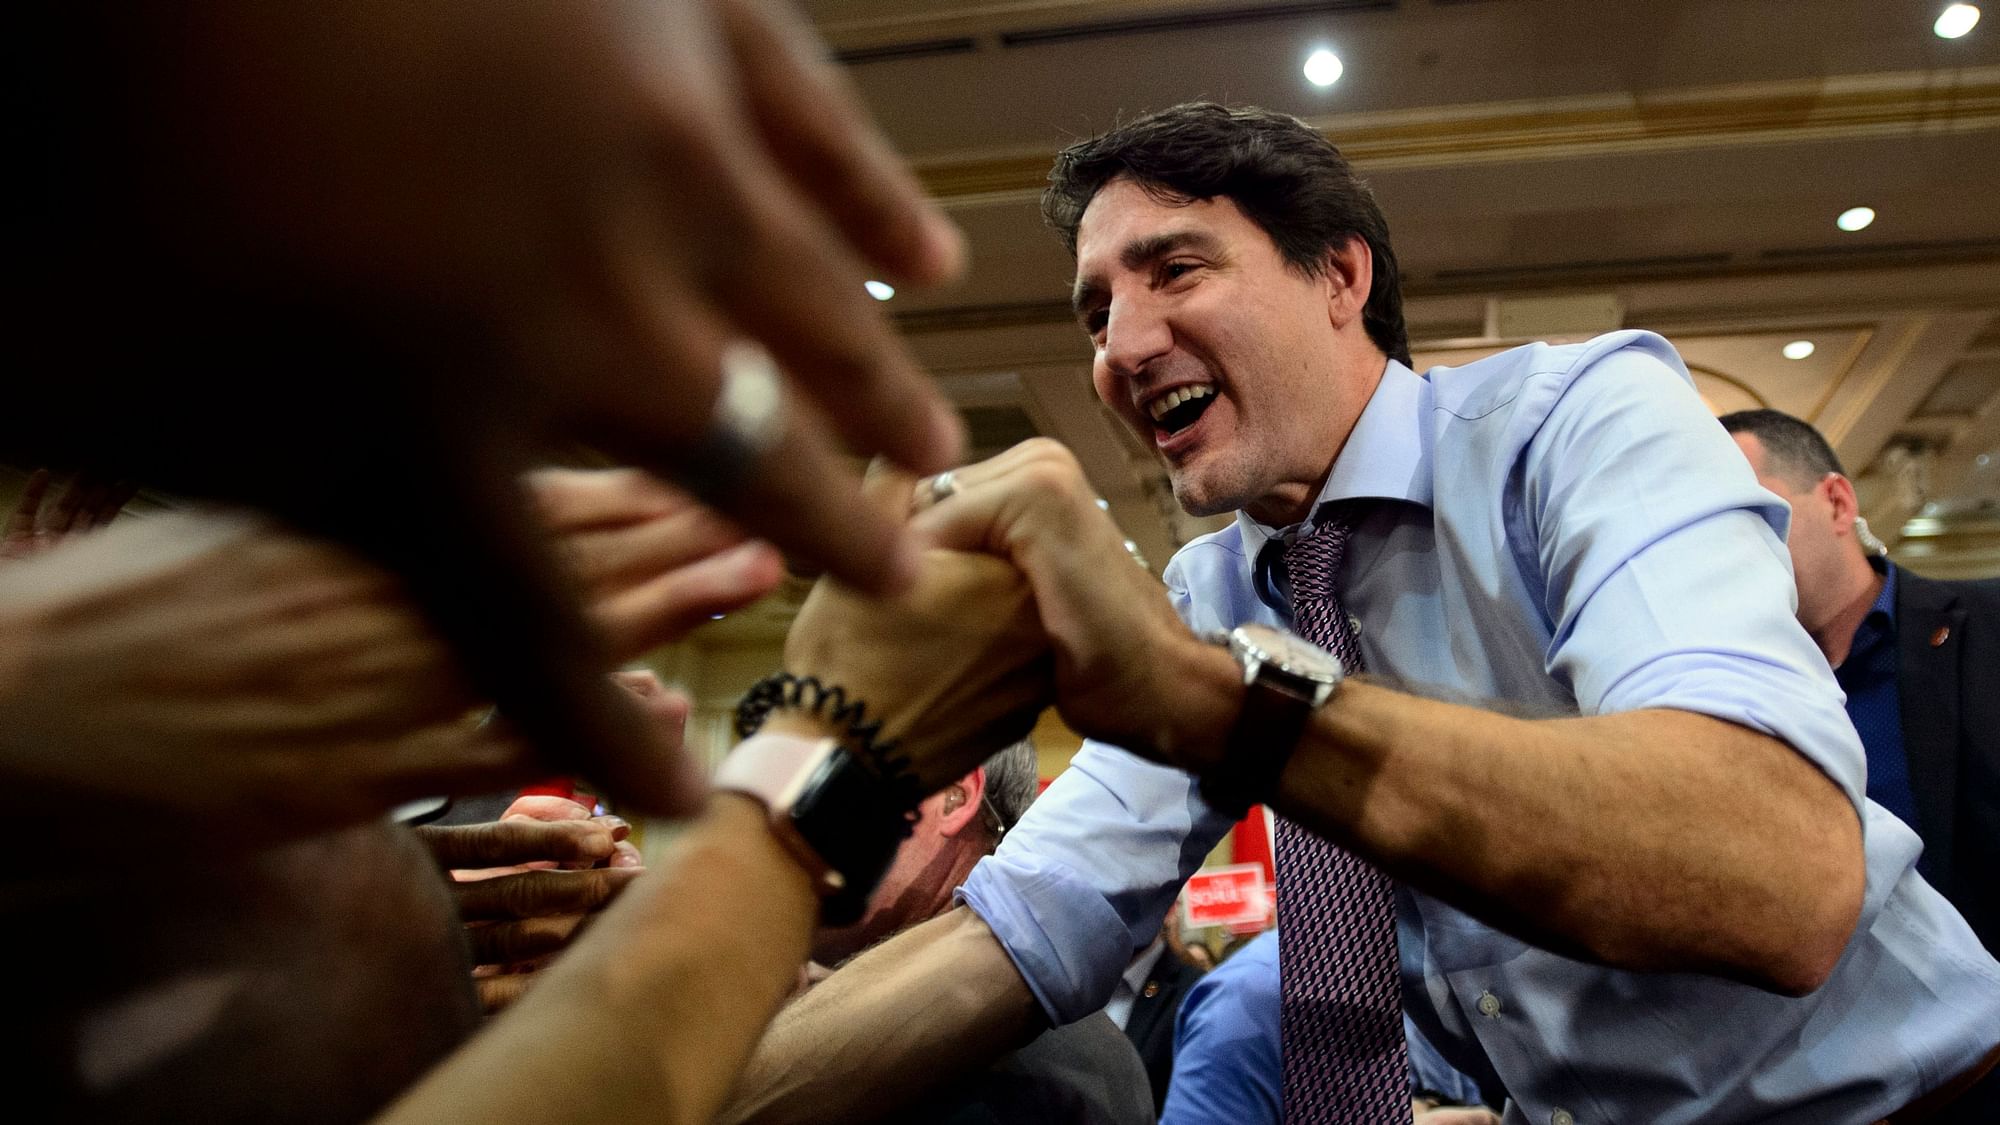  Justin Trudeau’s Liberals will hold on to control of Canada’s government, for the second term, said local media reports.